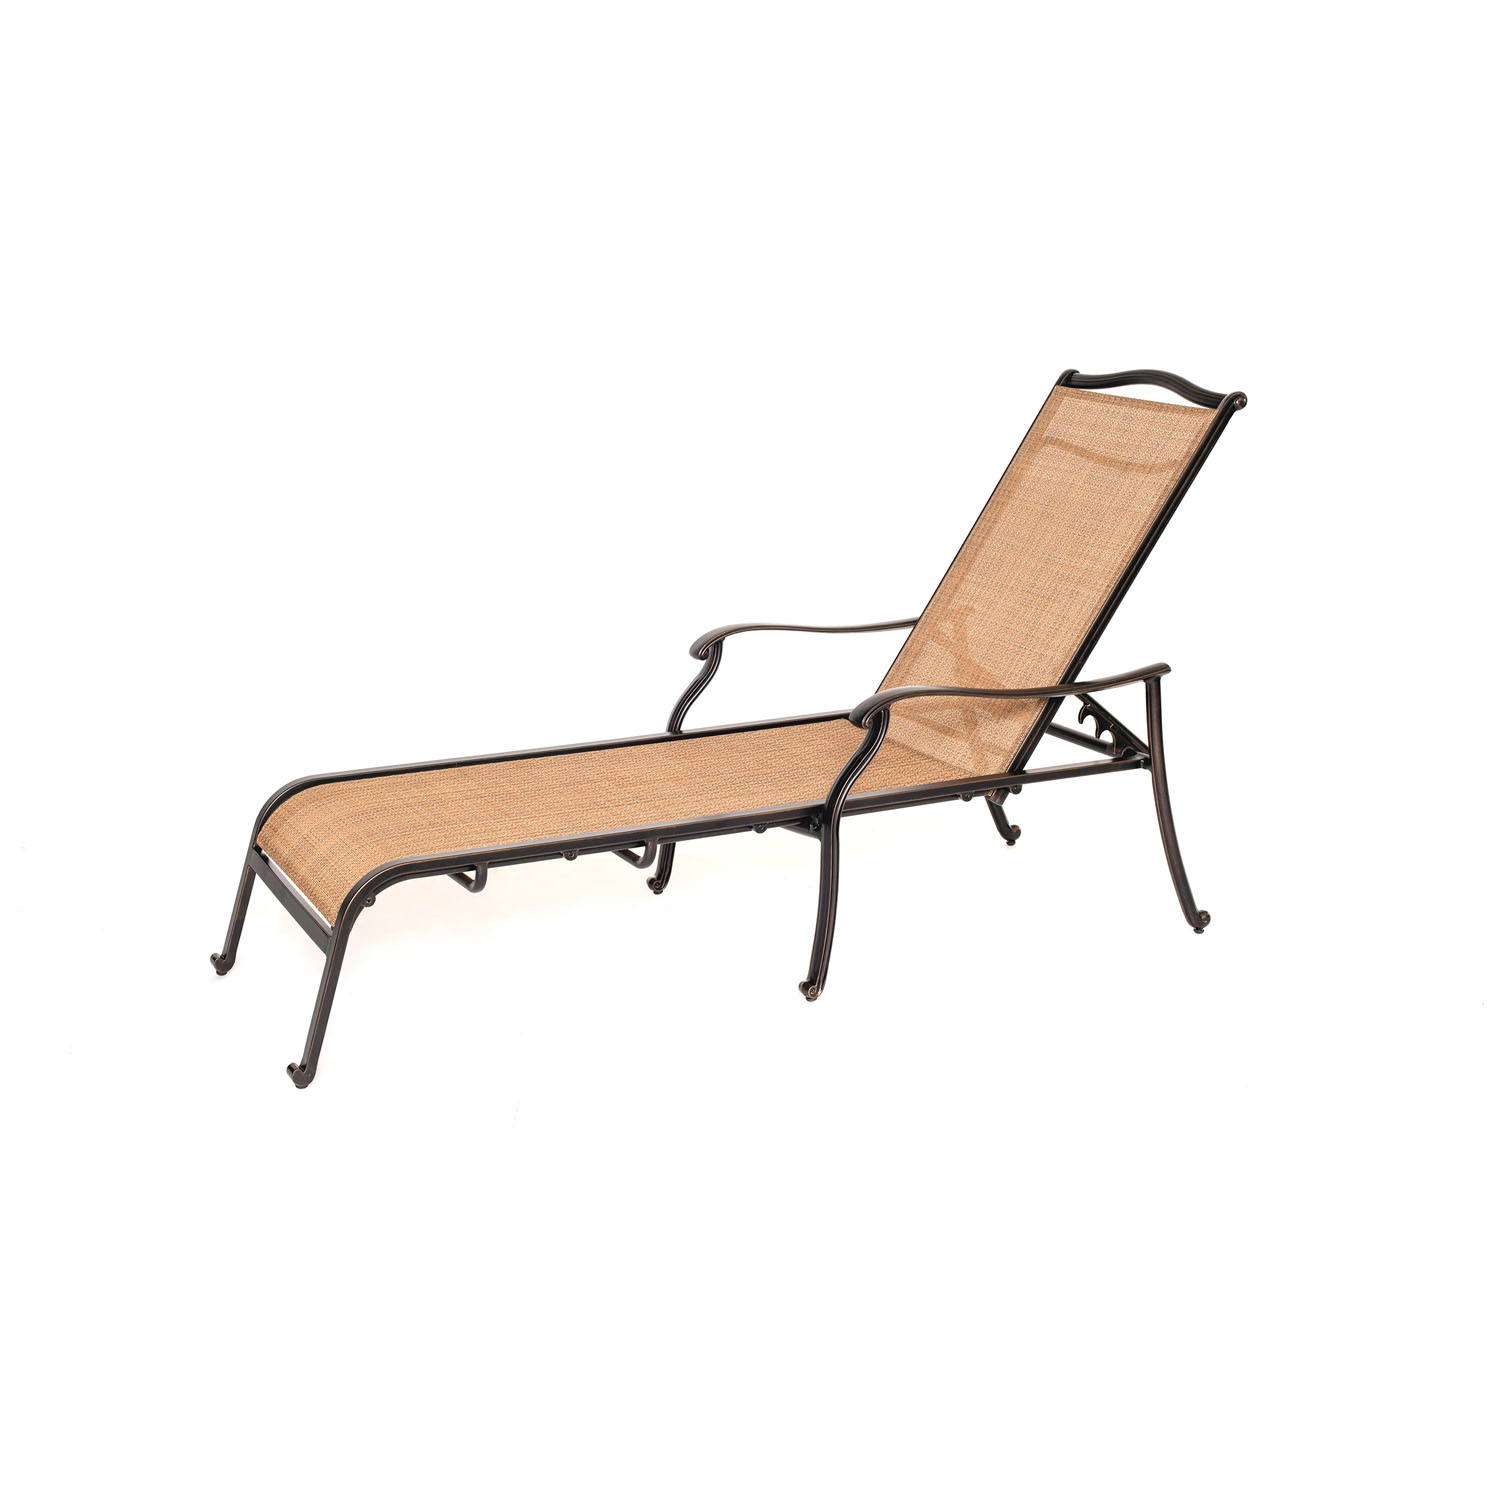 Hanover Monaco Outdoor Chaise Lounge Chair with Durable Sling Fabric and Rustproof Aluminum Frames | UV and Water-Resistant | MONCHS - image 3 of 6